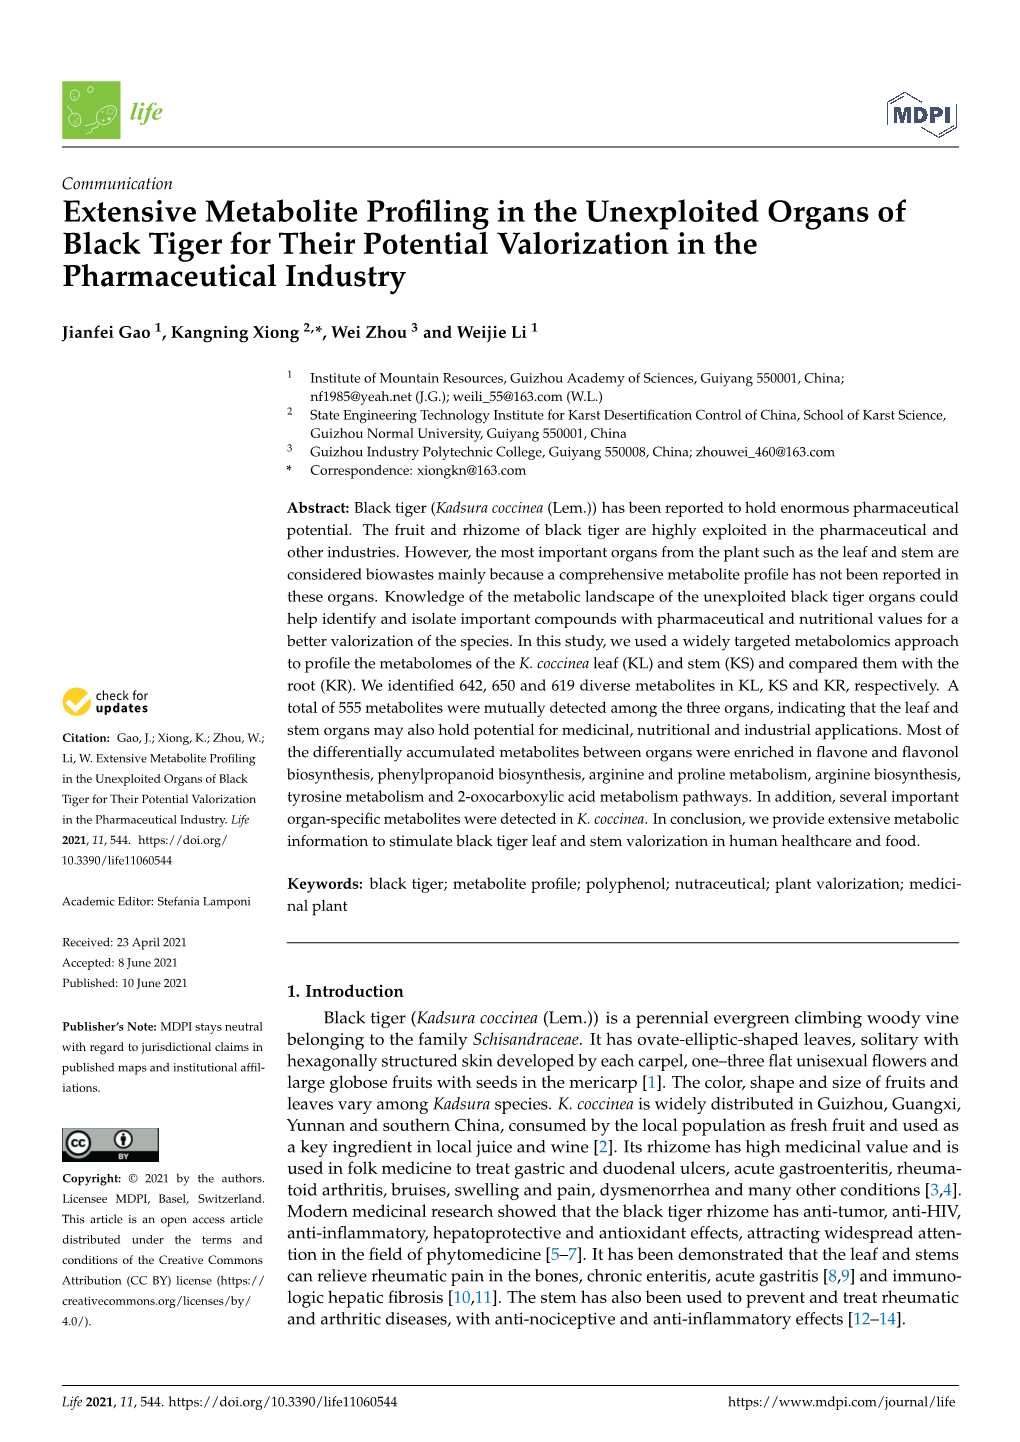 Extensive Metabolite Profiling in the Unexploited Organs of Black Tiger